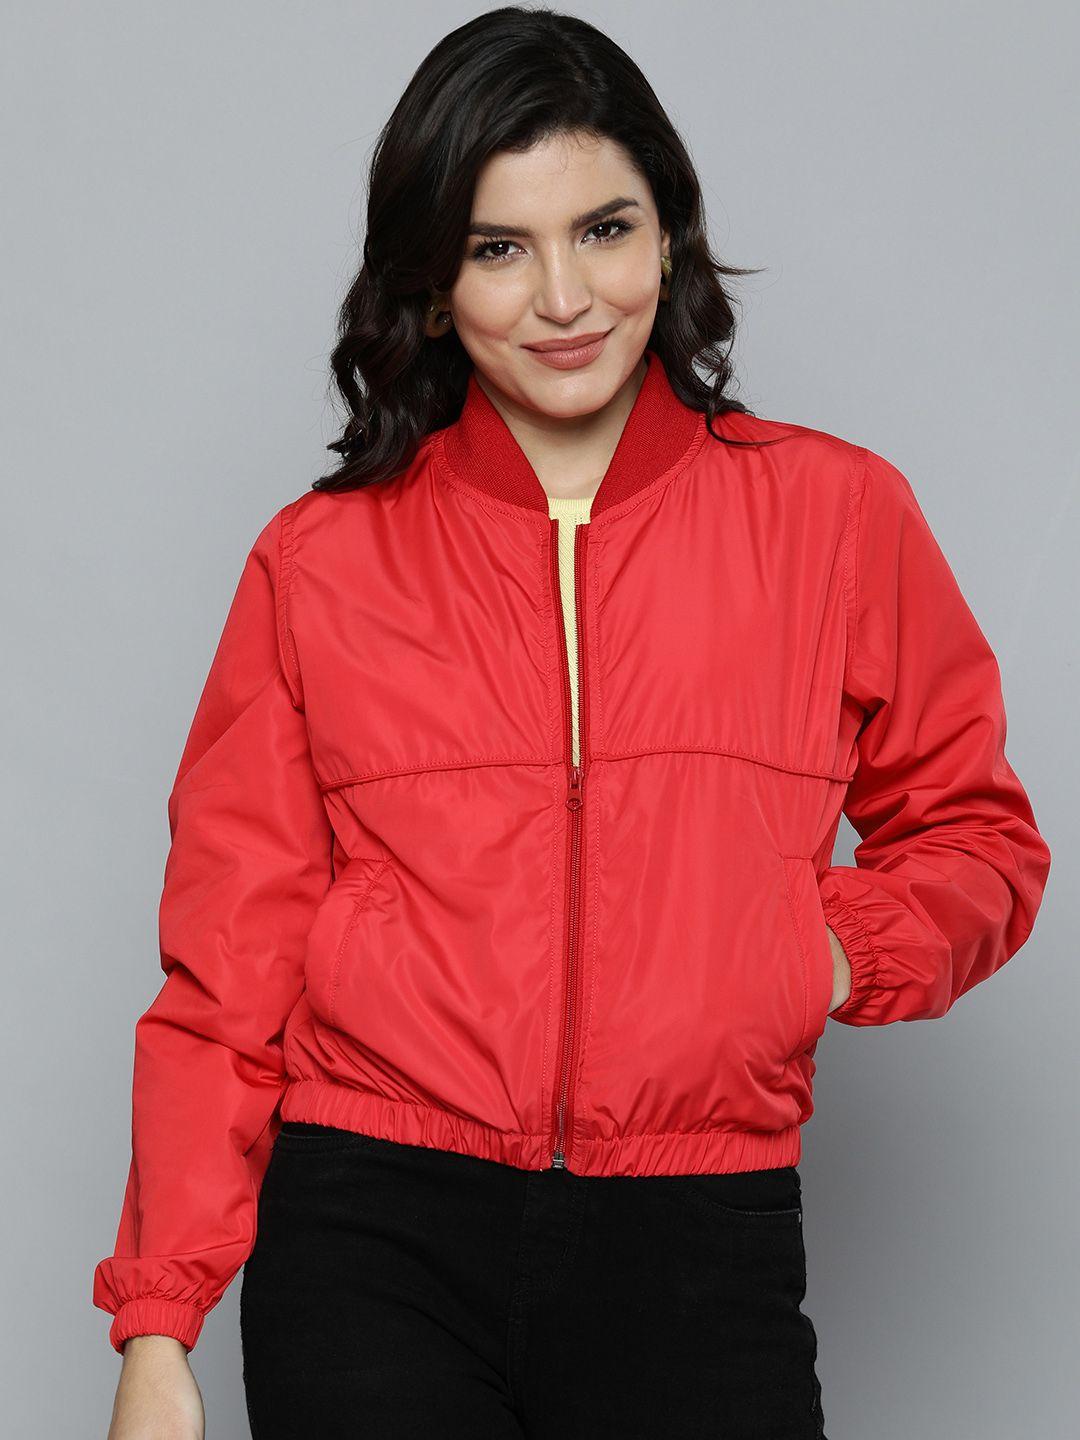 here&now women coral red solid bomber jacket